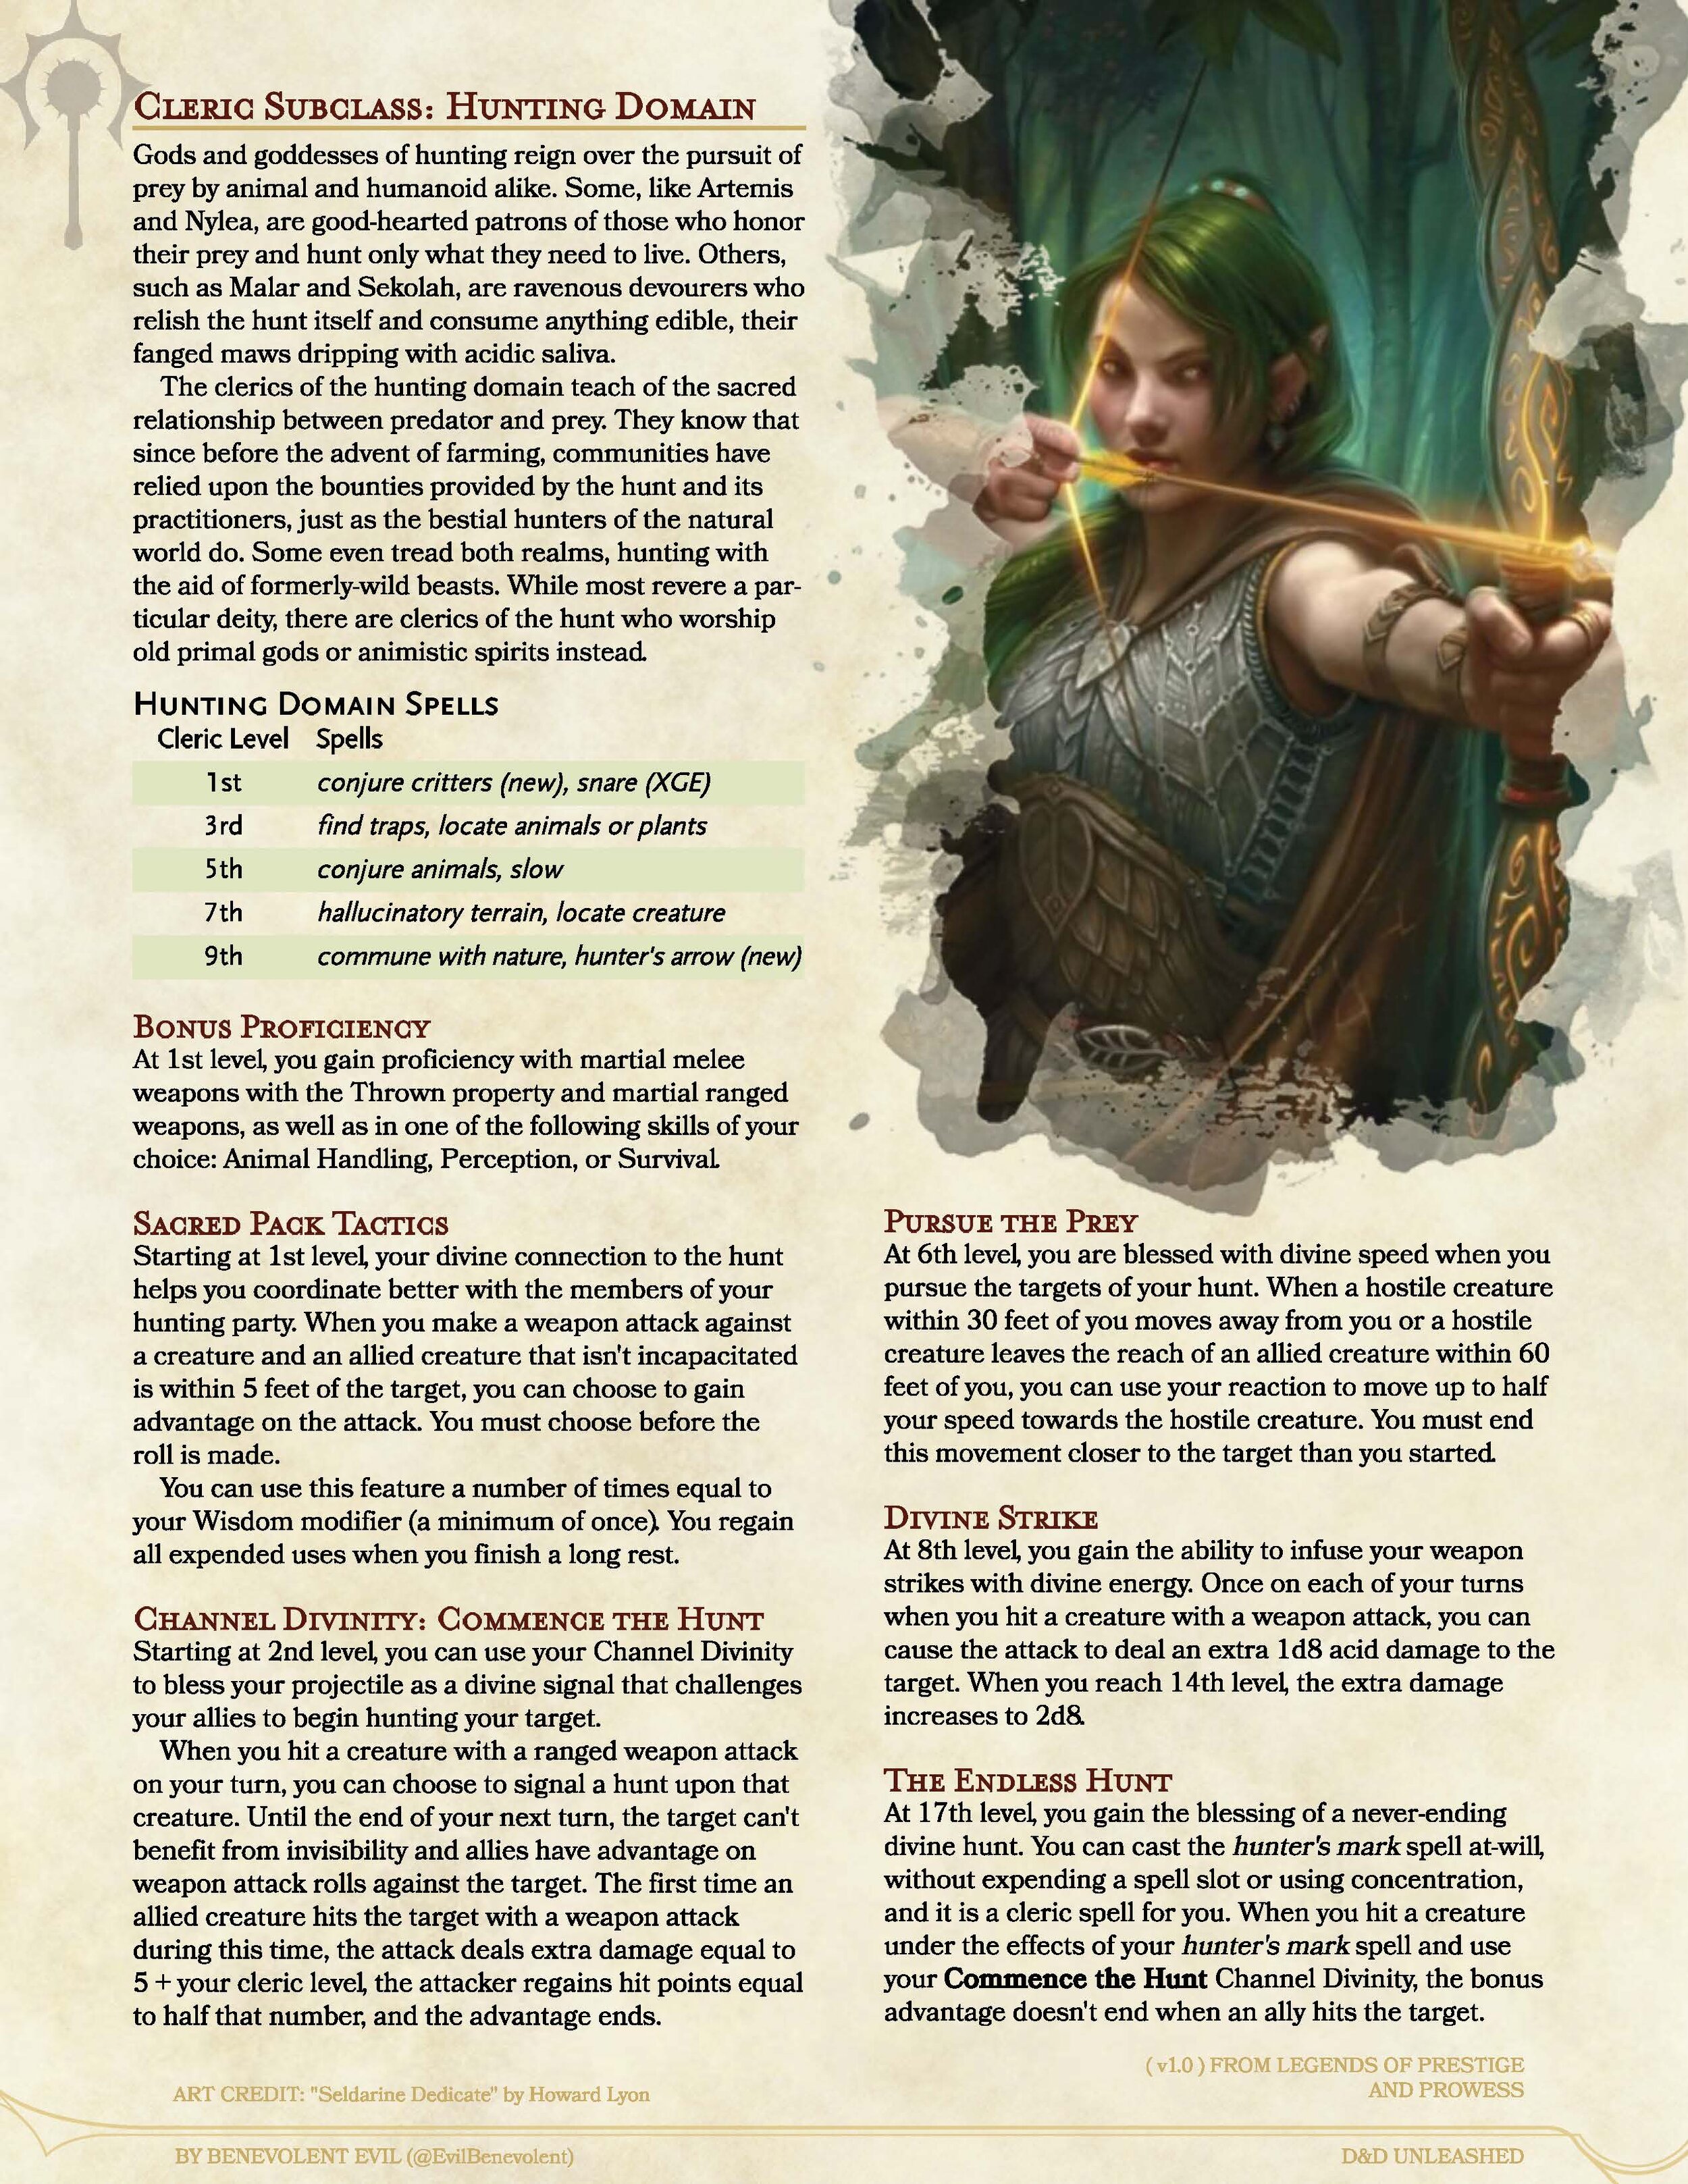 A Druid S Guide To 5e Simple Things Every Druid Should Know About In Dungeons And Dragons Happy Gamer